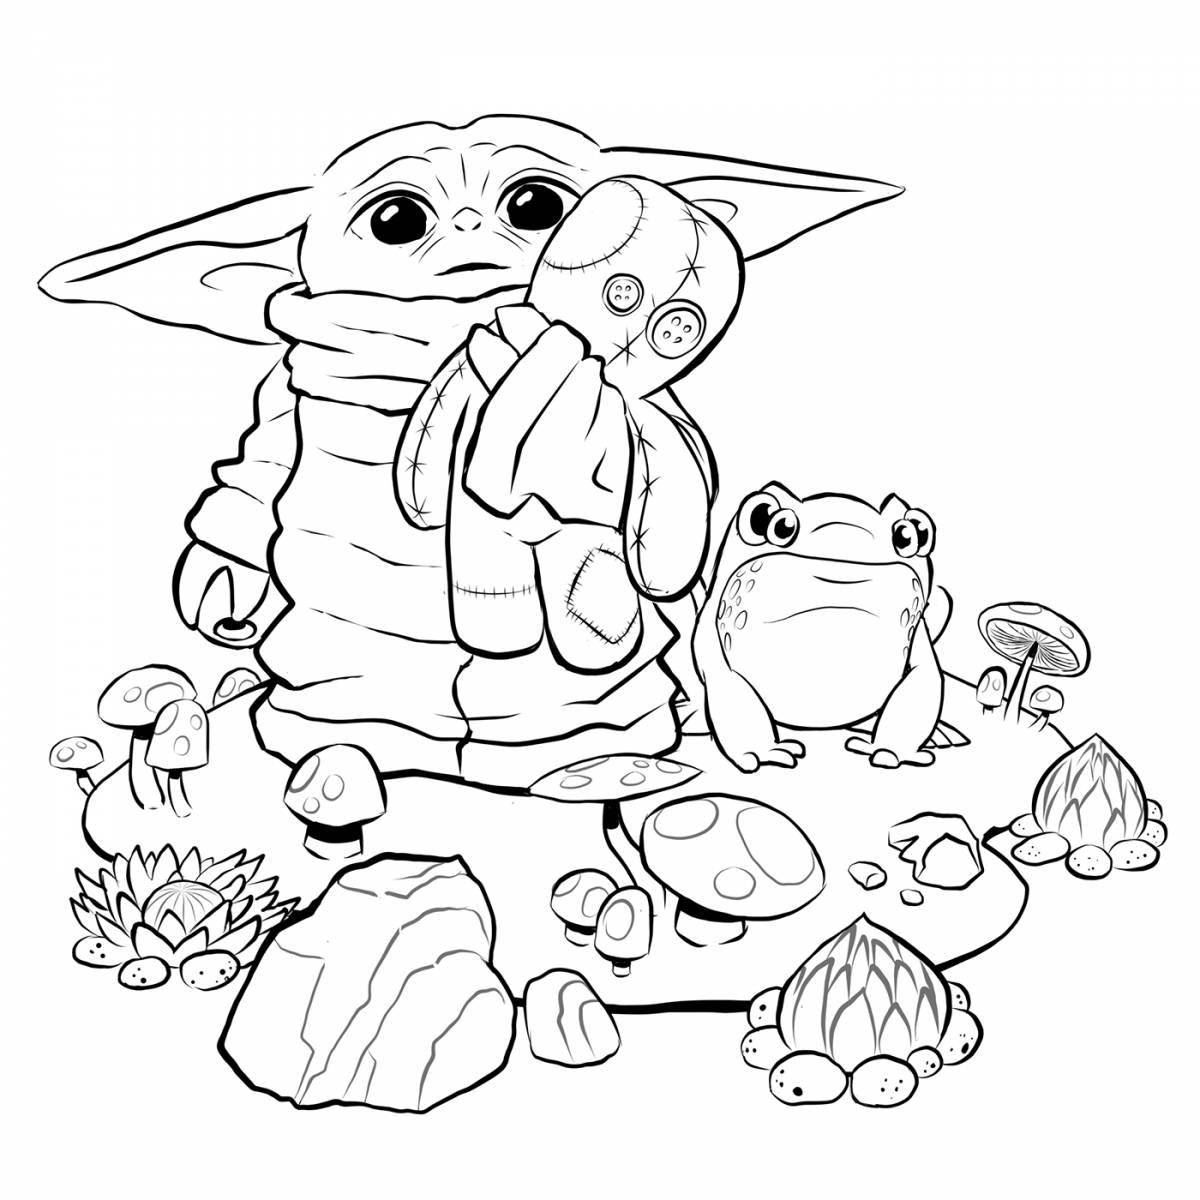 Flawless Yoda coloring page